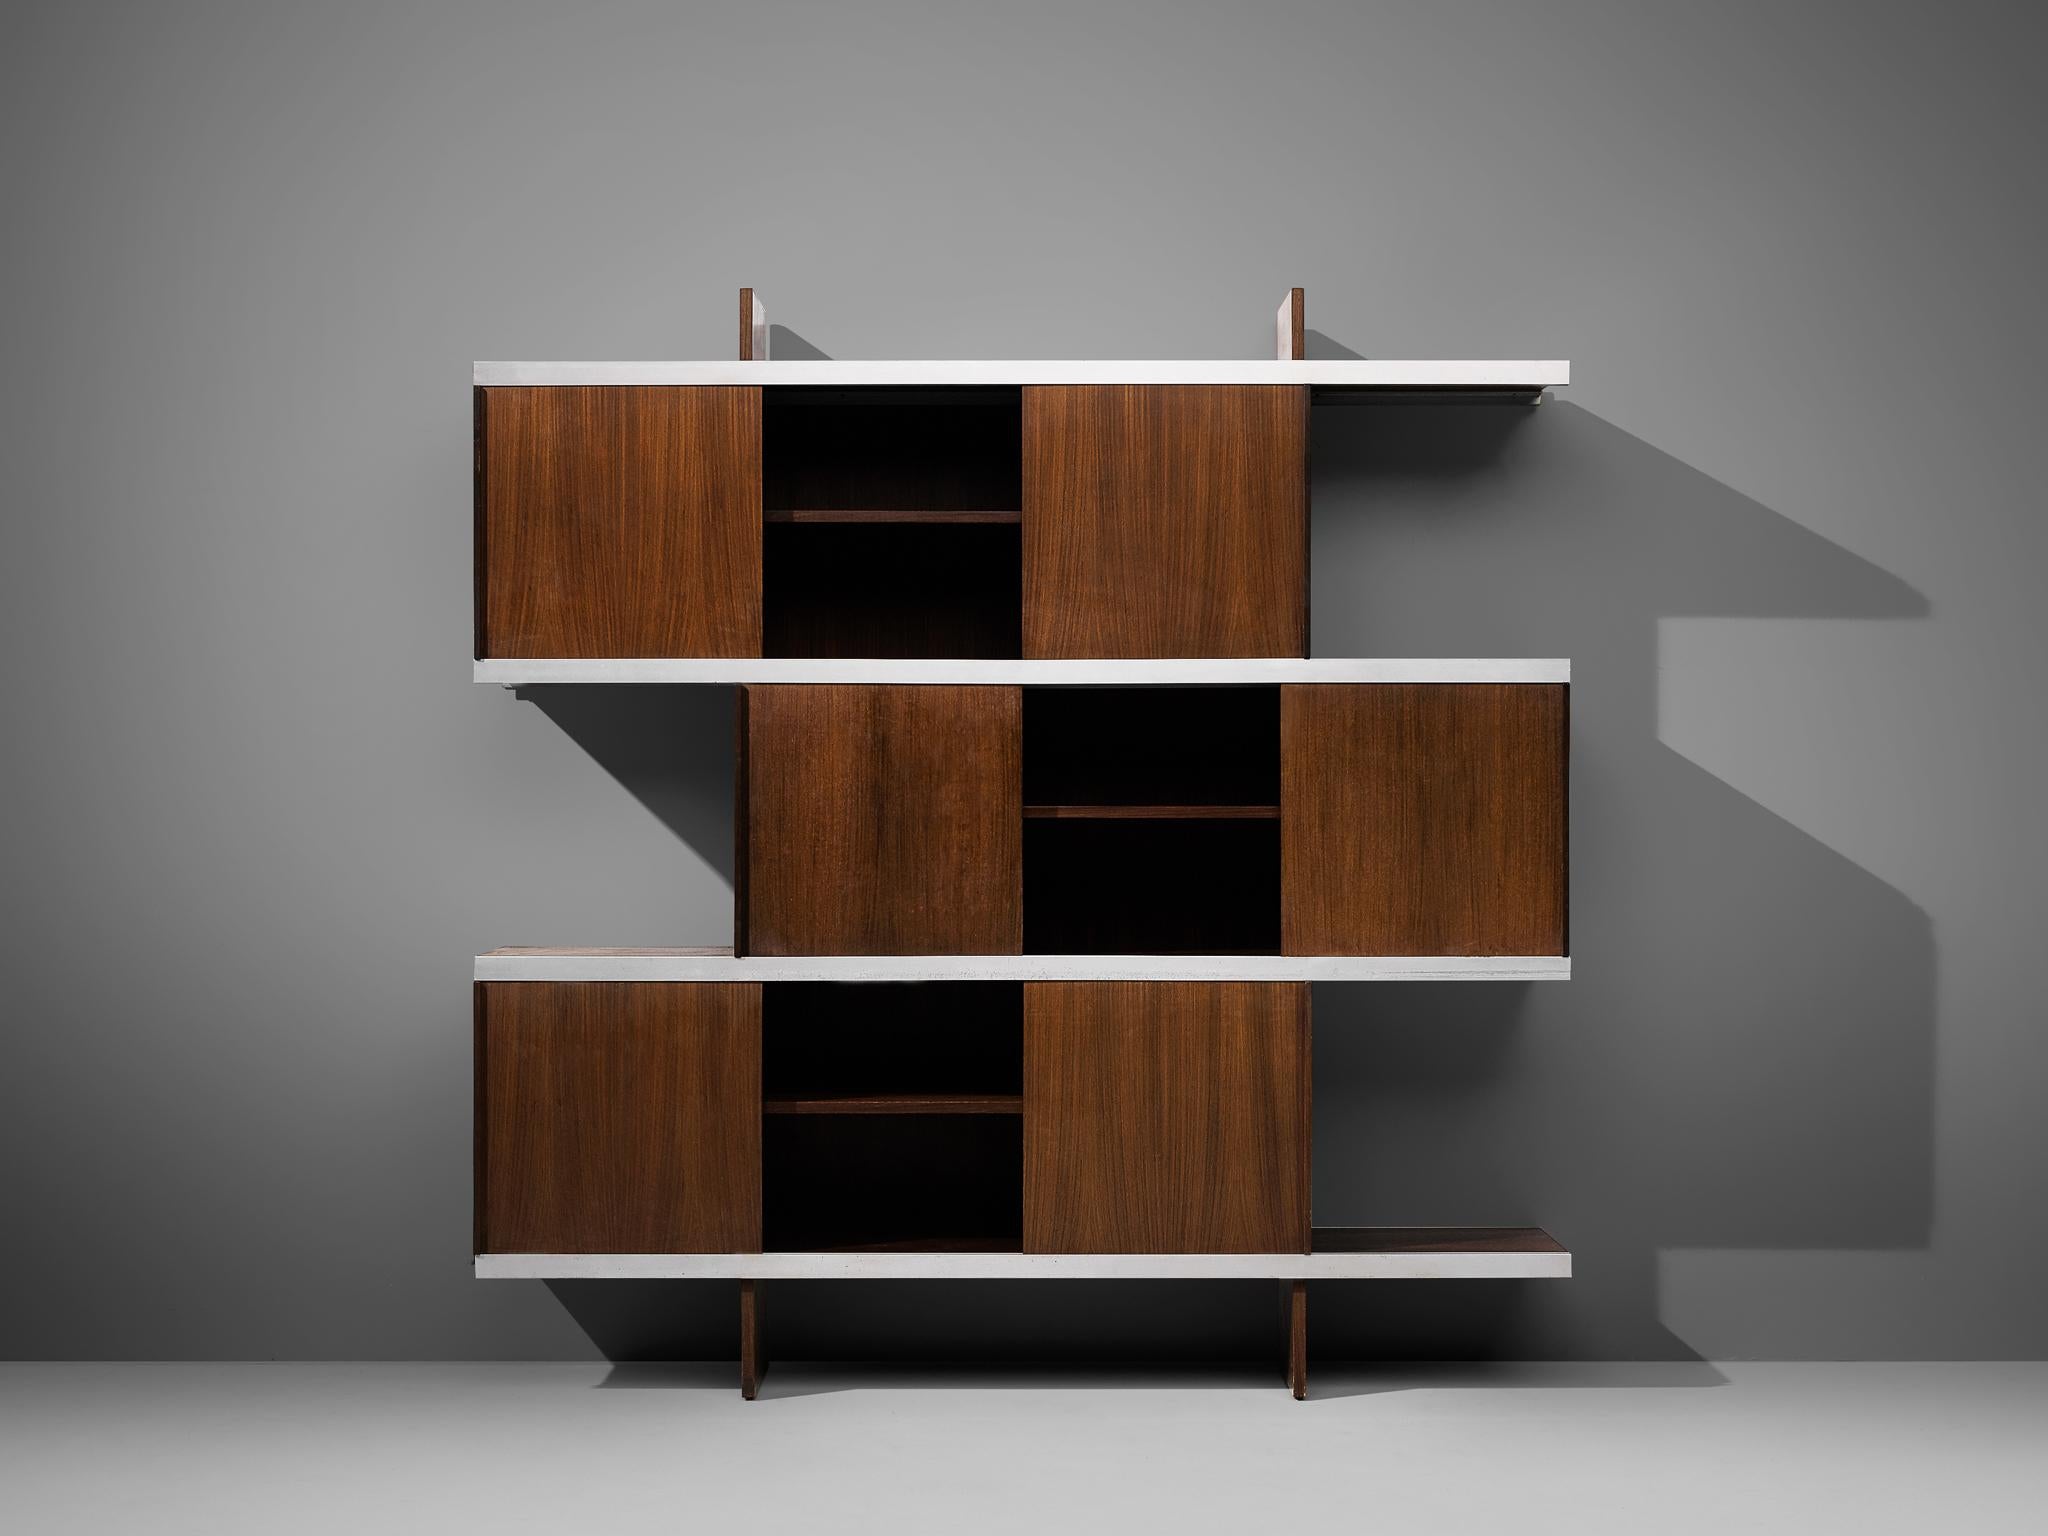 Angelo Mangiarotti for Poltronova, wall unit from 'Multiuse Series', exotic wood, aluminum, Italy, 1965

Beautiful bookcase or cabinet of the 'Multiuse Series' that Mangiarotti designed for Poltronova in 1965. Known for his designs with marble